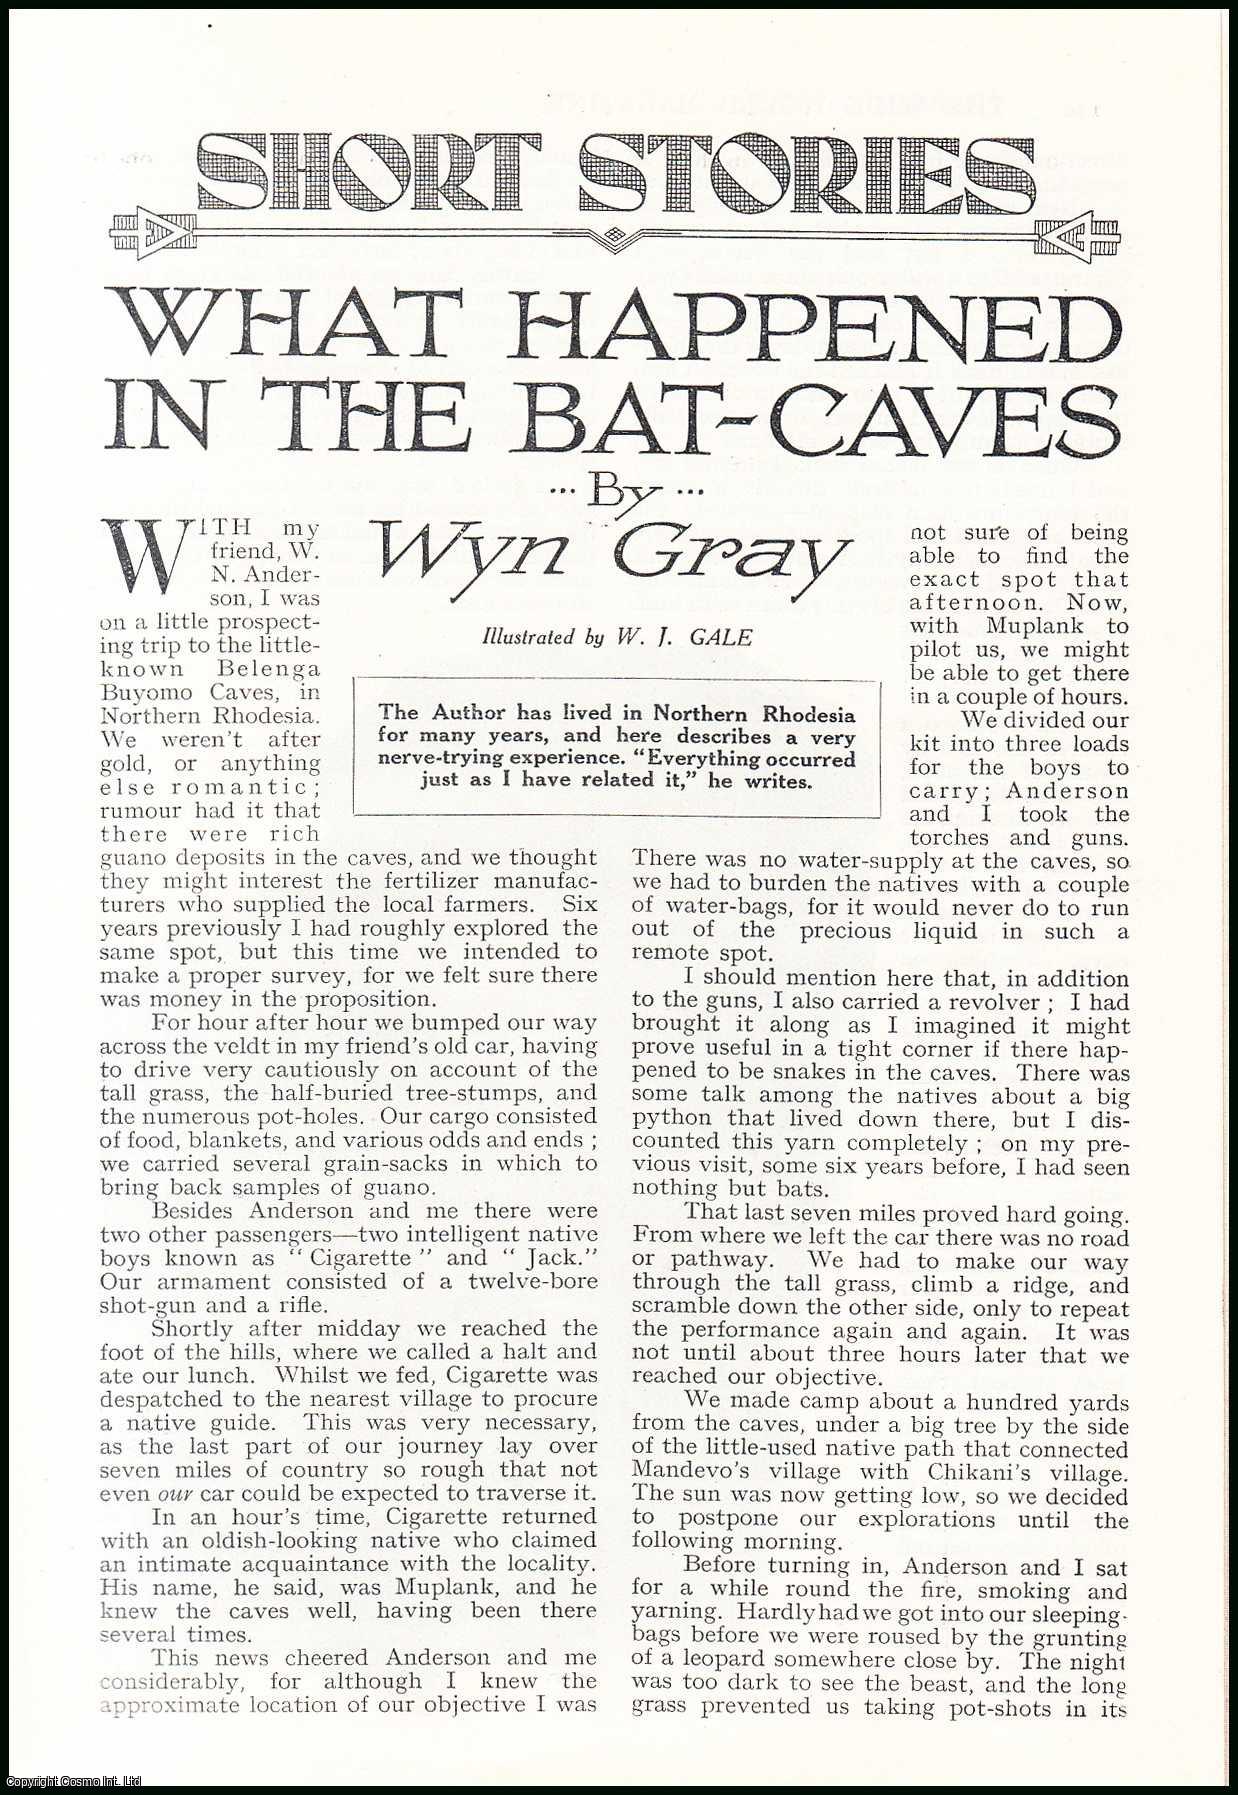 Wyn Gray - What Happened In The Bat-Caves, Northern Rhodesia. An uncommon original article from the Wide World Magazine, 1932.